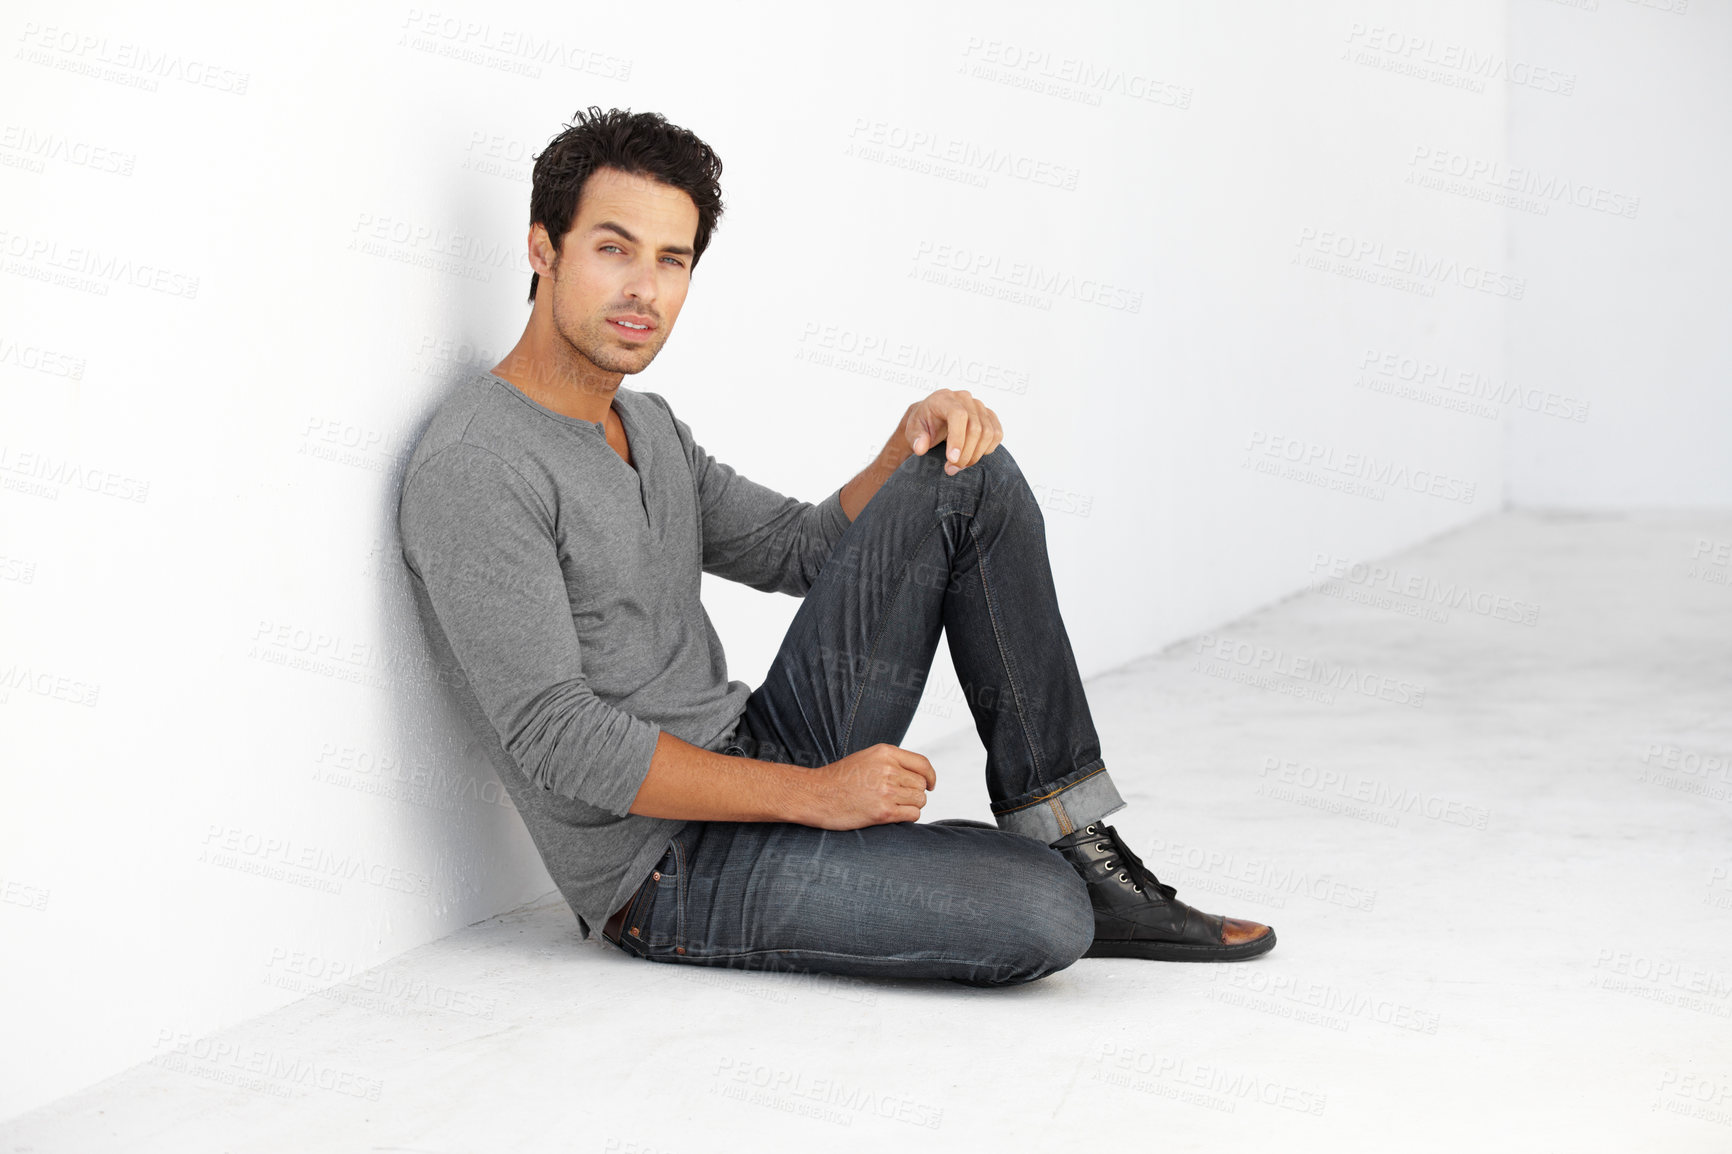 Buy stock photo Serious, fashion and portrait of young man by white wall with casual, stylish and trendy outfit. Attractive, confidence and handsome male model from Canada sitting on floor with edgy and cool style.